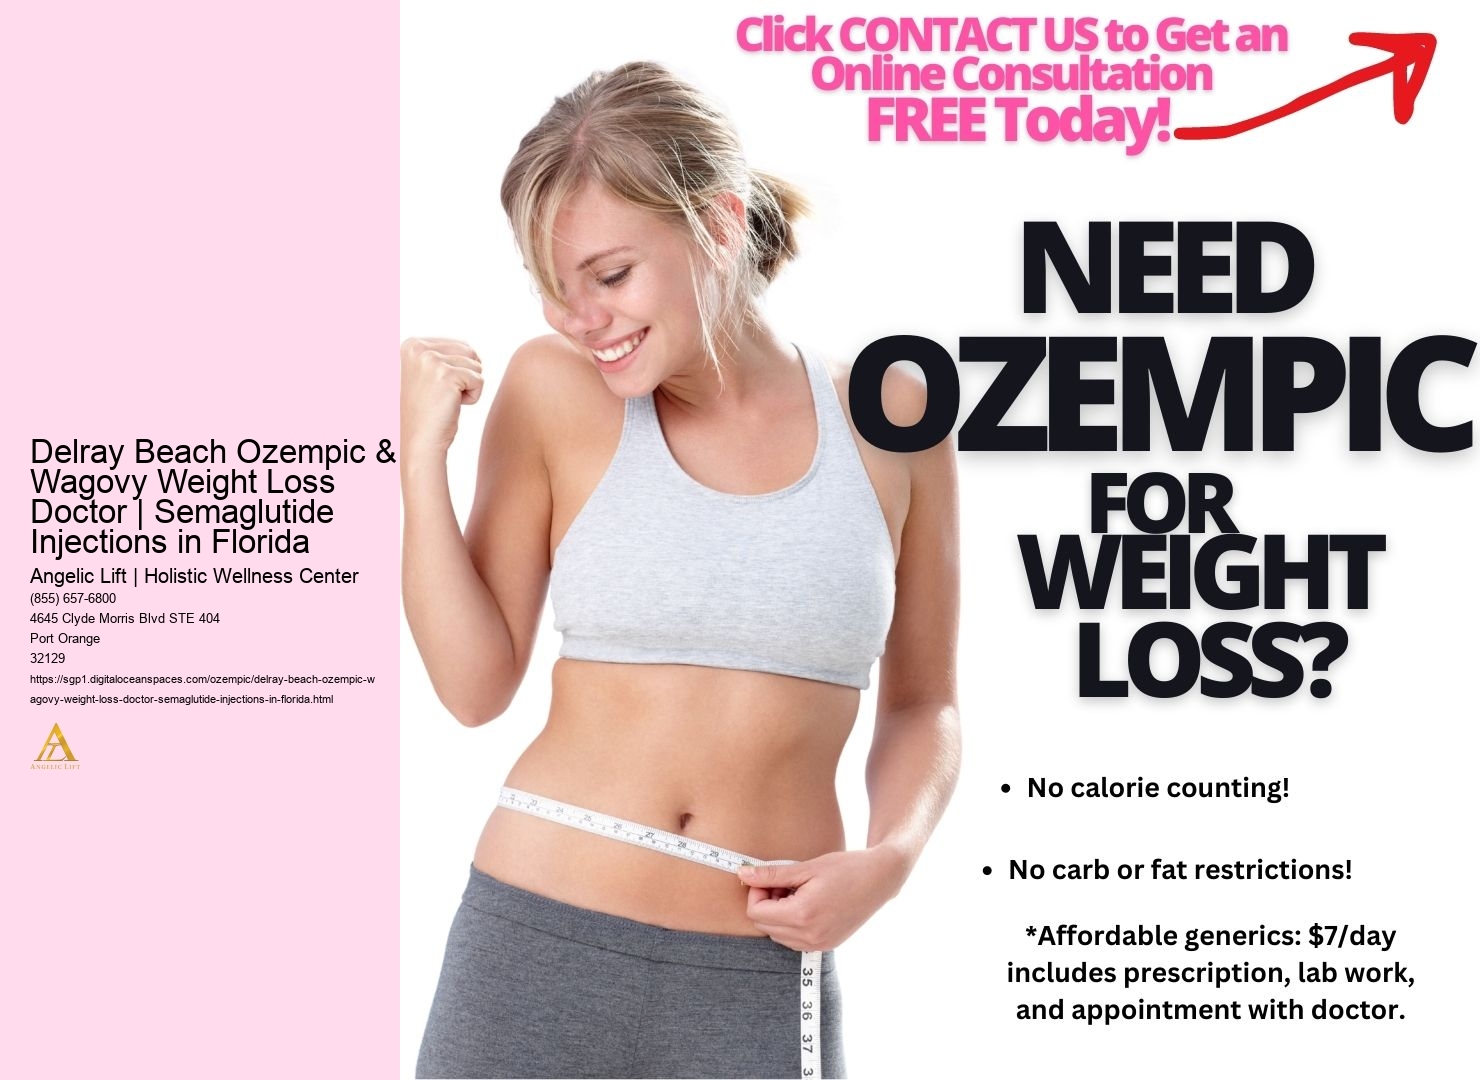 Delray Beach Ozempic & Wagovy Weight Loss Doctor | Semaglutide Injections in Florida